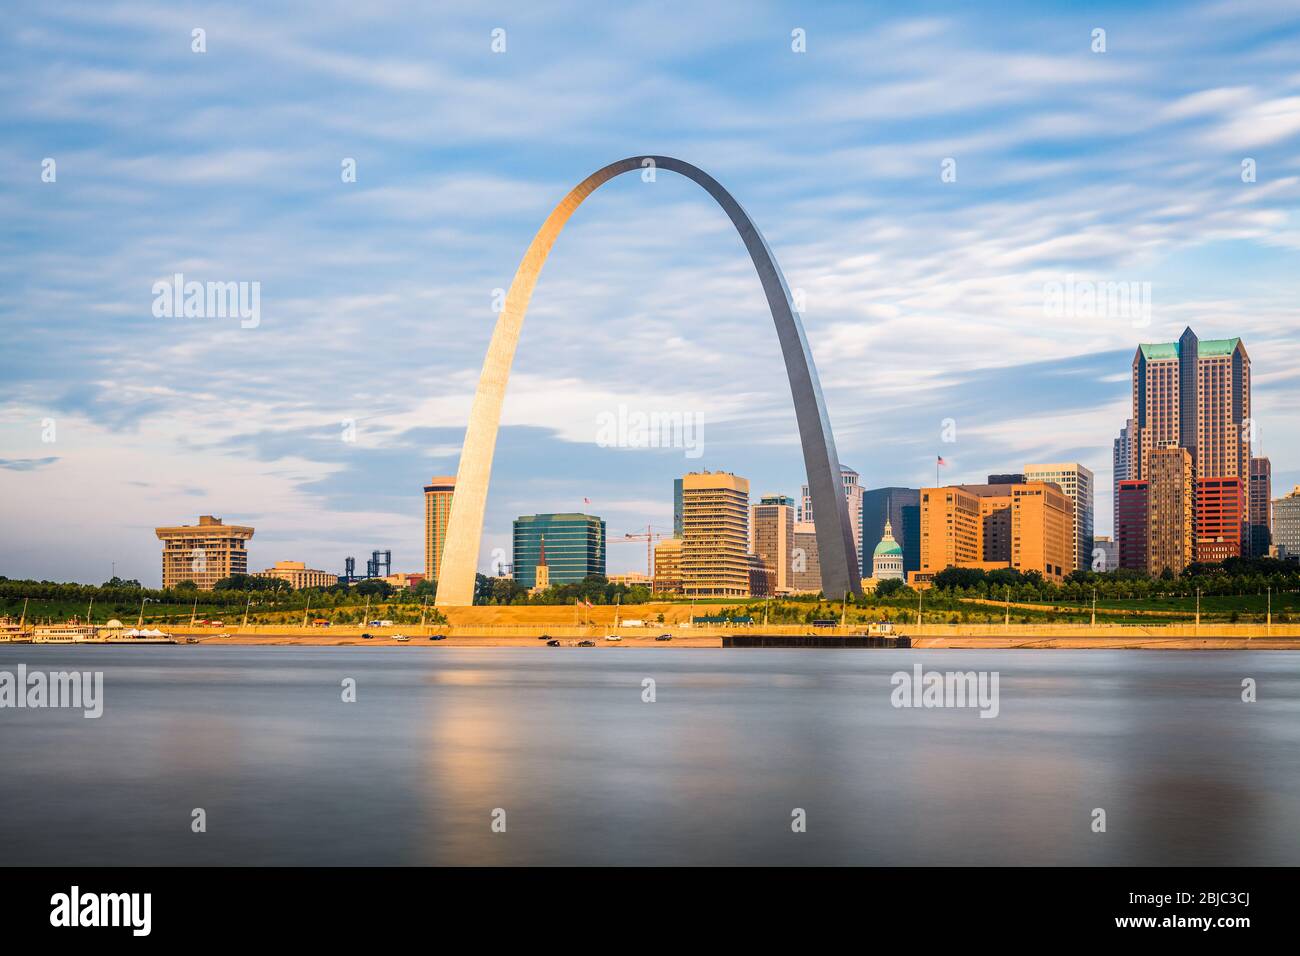 St. Louis, Missouri, USA downtown cityscape on the Mississippi River. Stock Photo